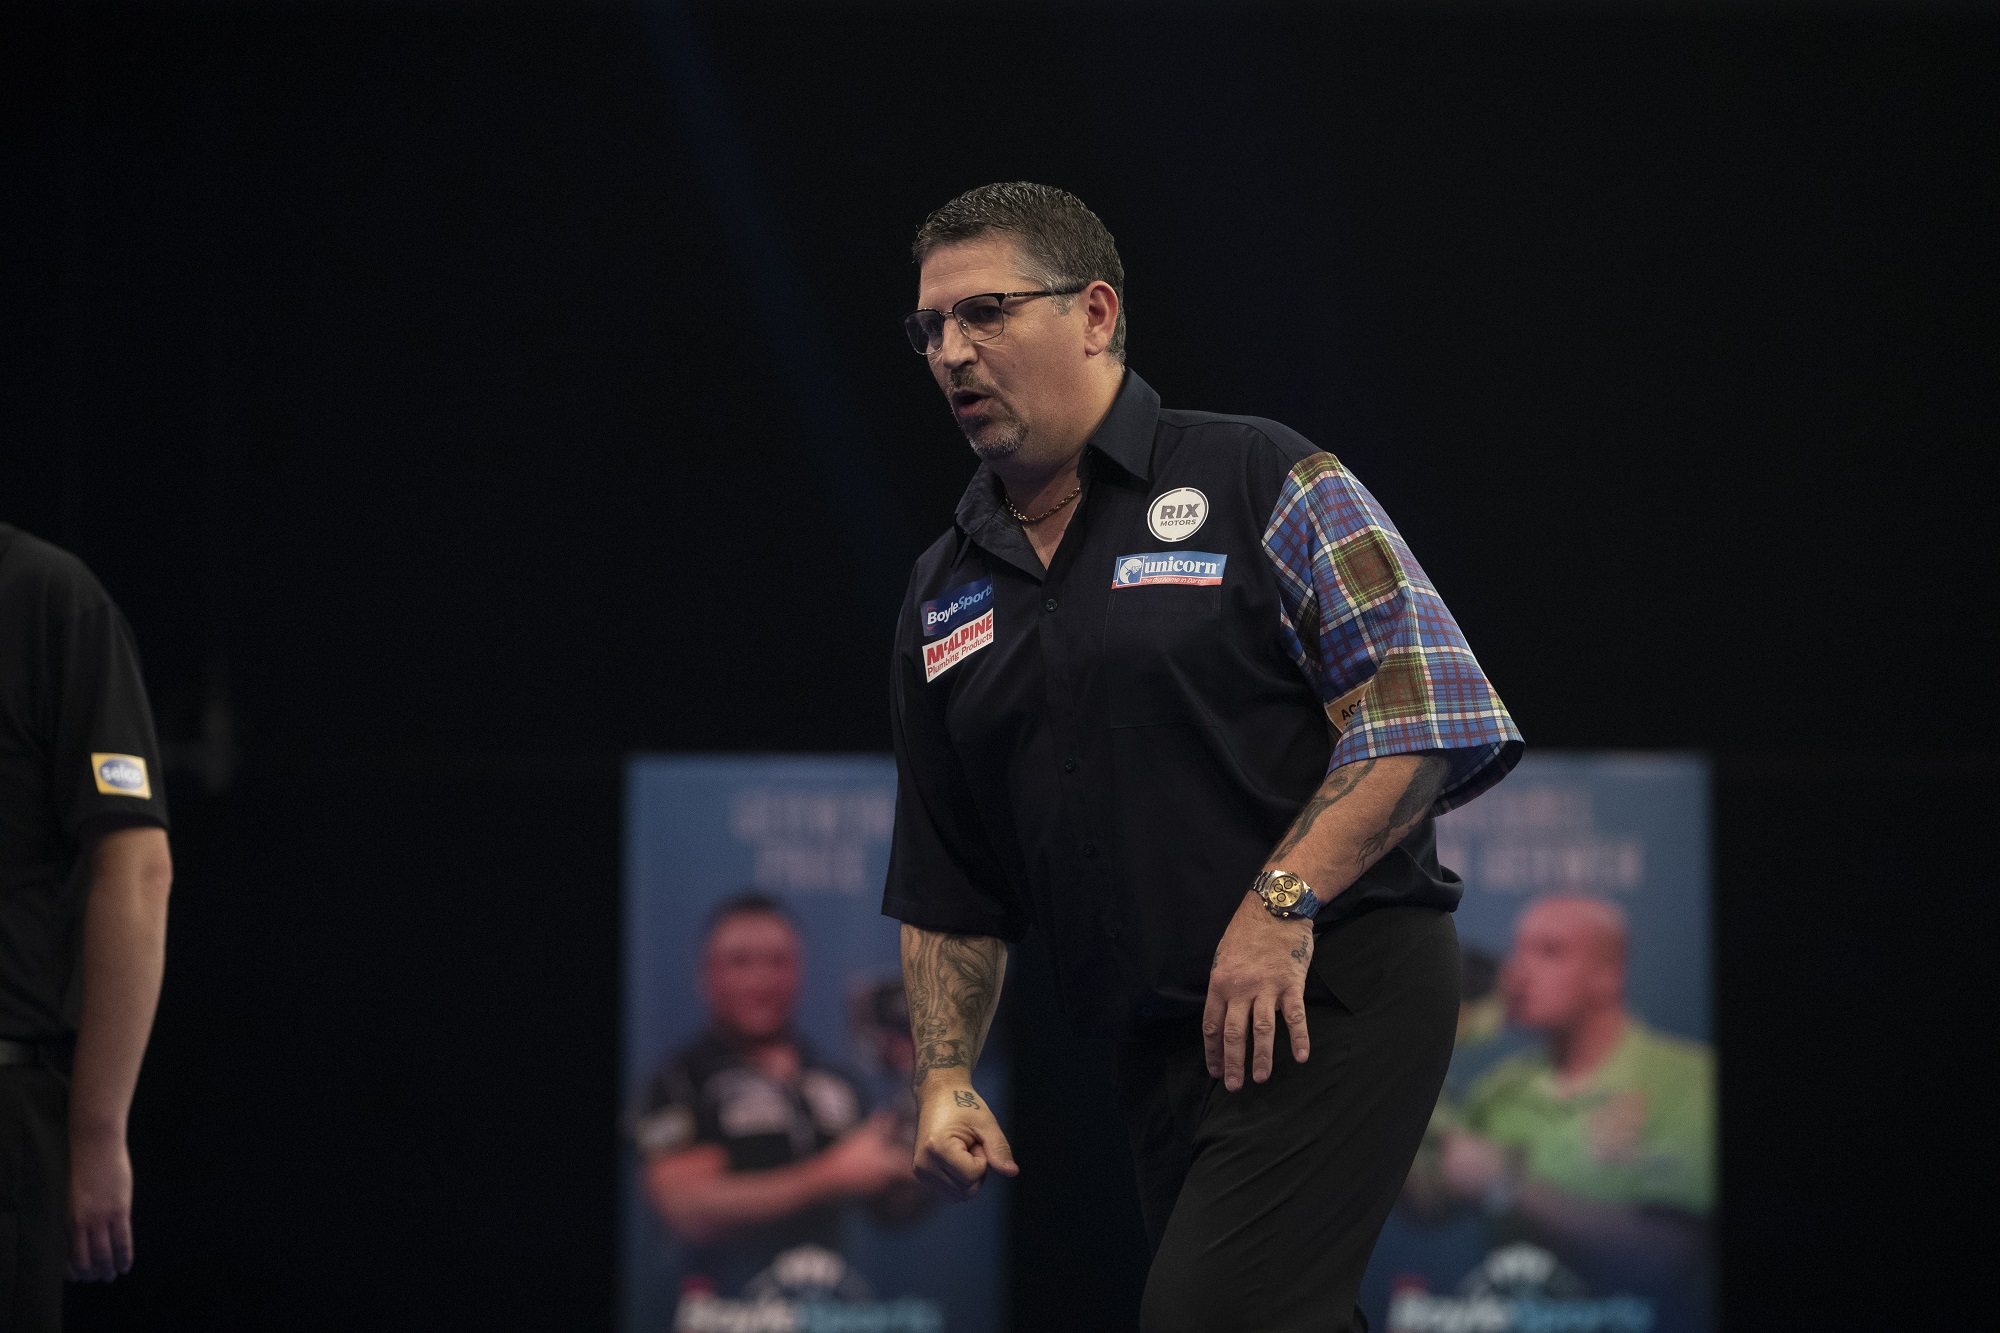 Gary Anderson self-isolating after contact tests positive for COVID-19